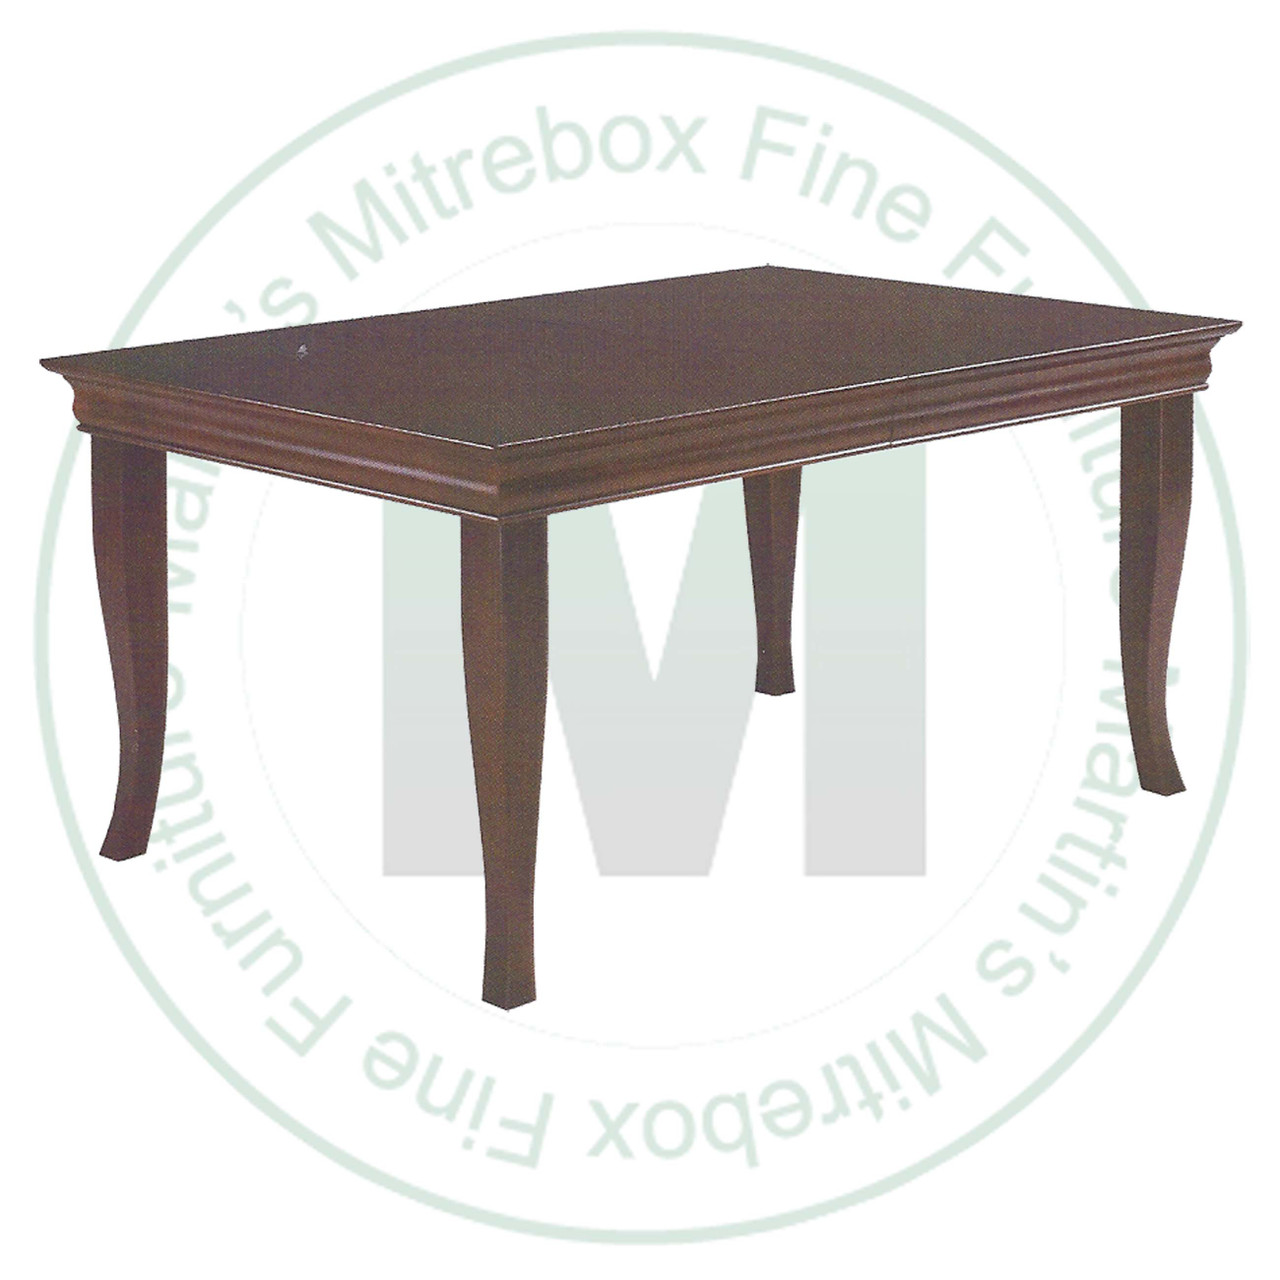 Maple French Riviera Extension Harvest Table 36''D x 60''W x 30''H With 3 - 12'' Leaves